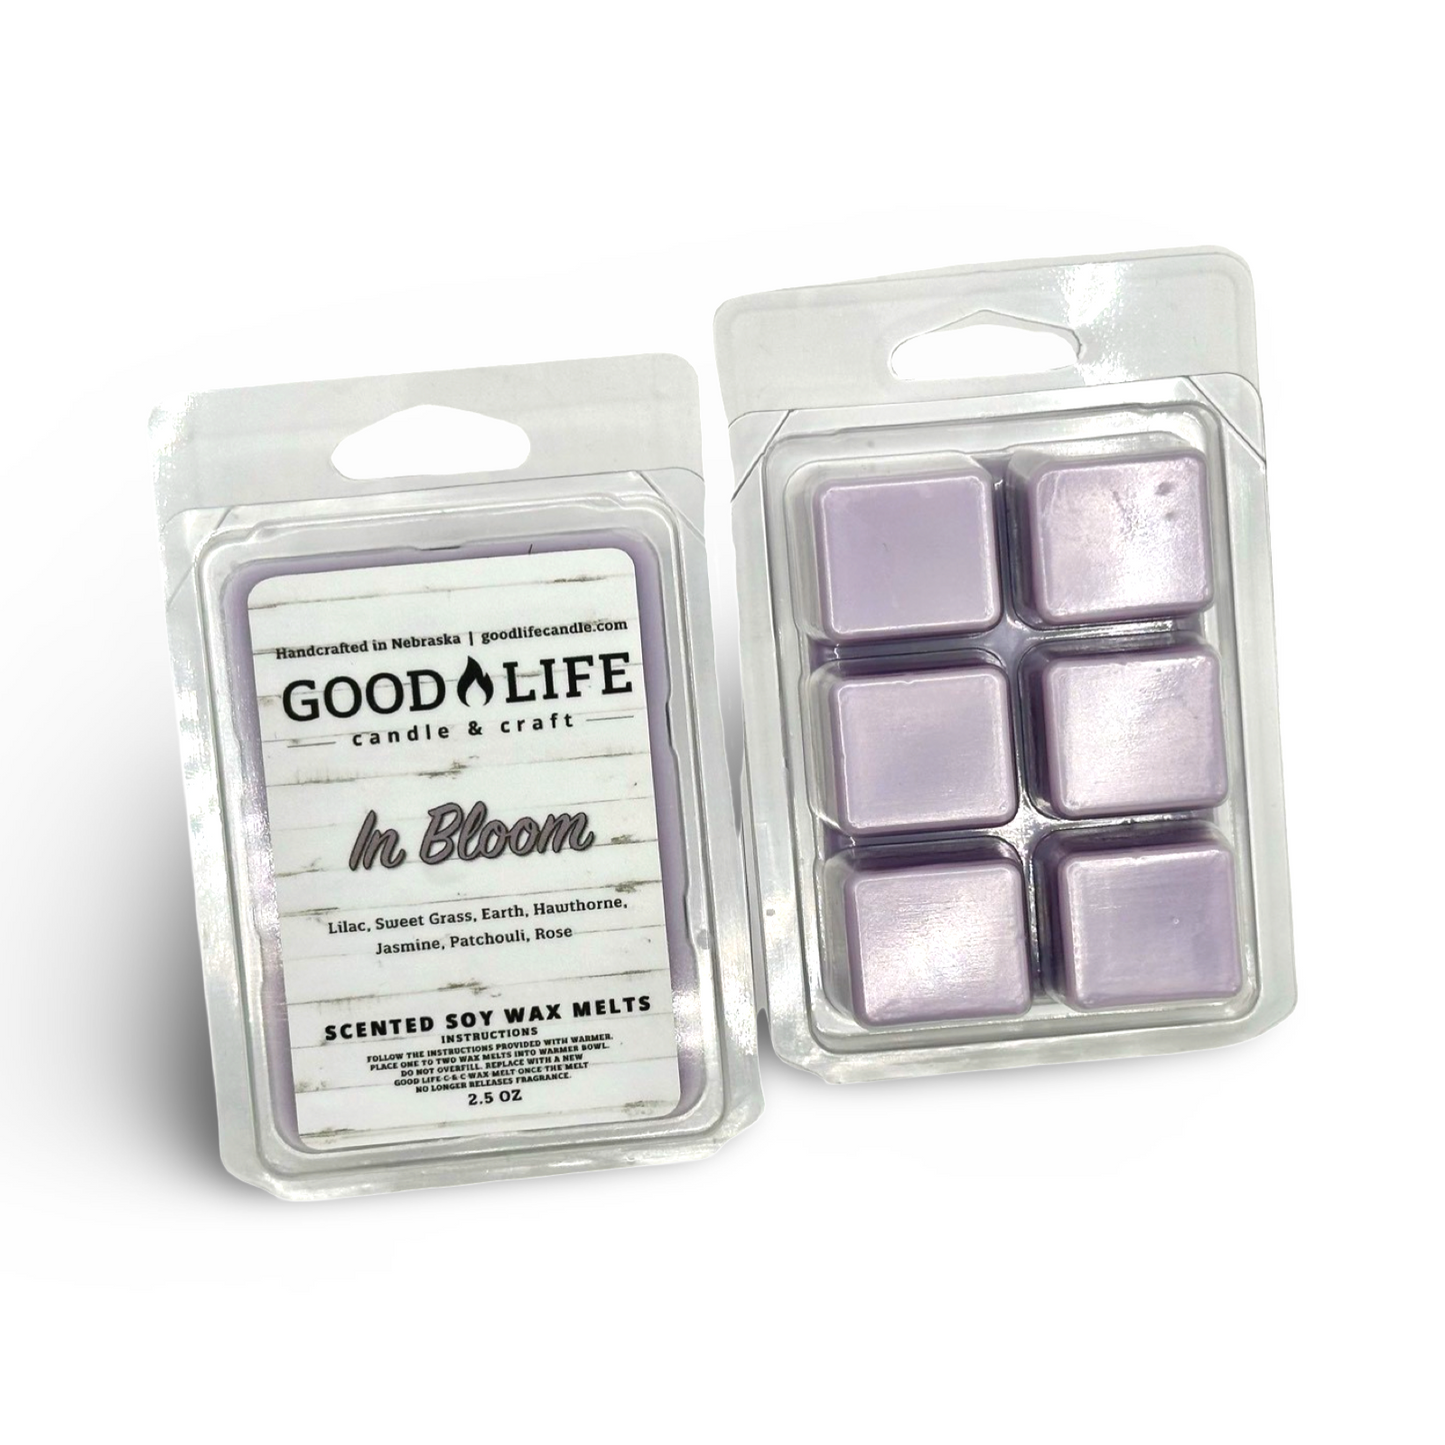 In Bloom Scented Wax Melts